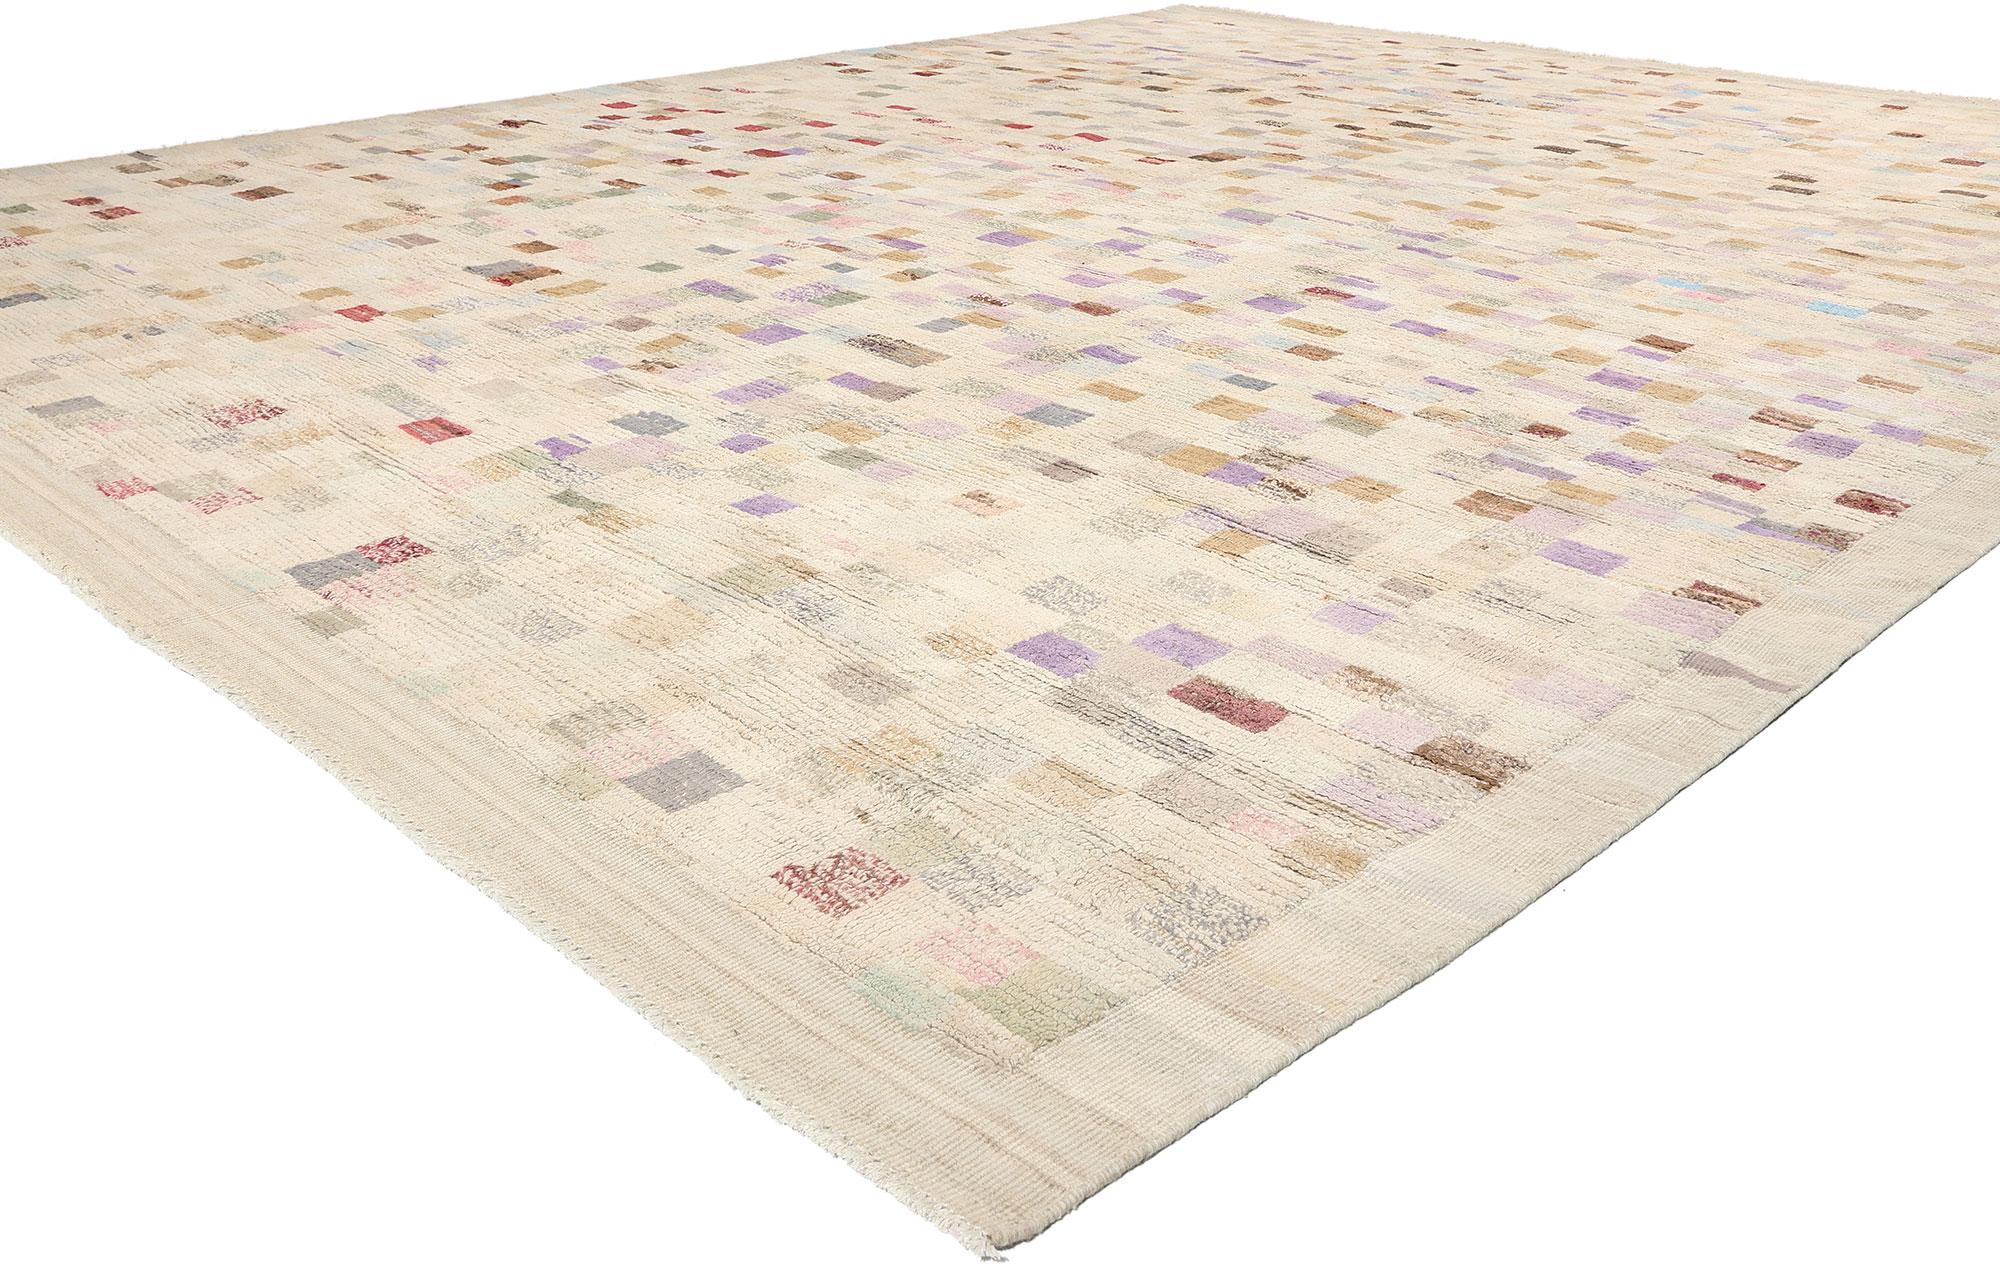 81092 Modern Moroccan Mosaic Rug, 12'00 x 14'10. Step into a realm where artistic movements collide, and cultural heritage takes on a contemporary guise with our exquisite hand-knotted wool Modern Moroccan mosaic rug. This stunning piece transcends